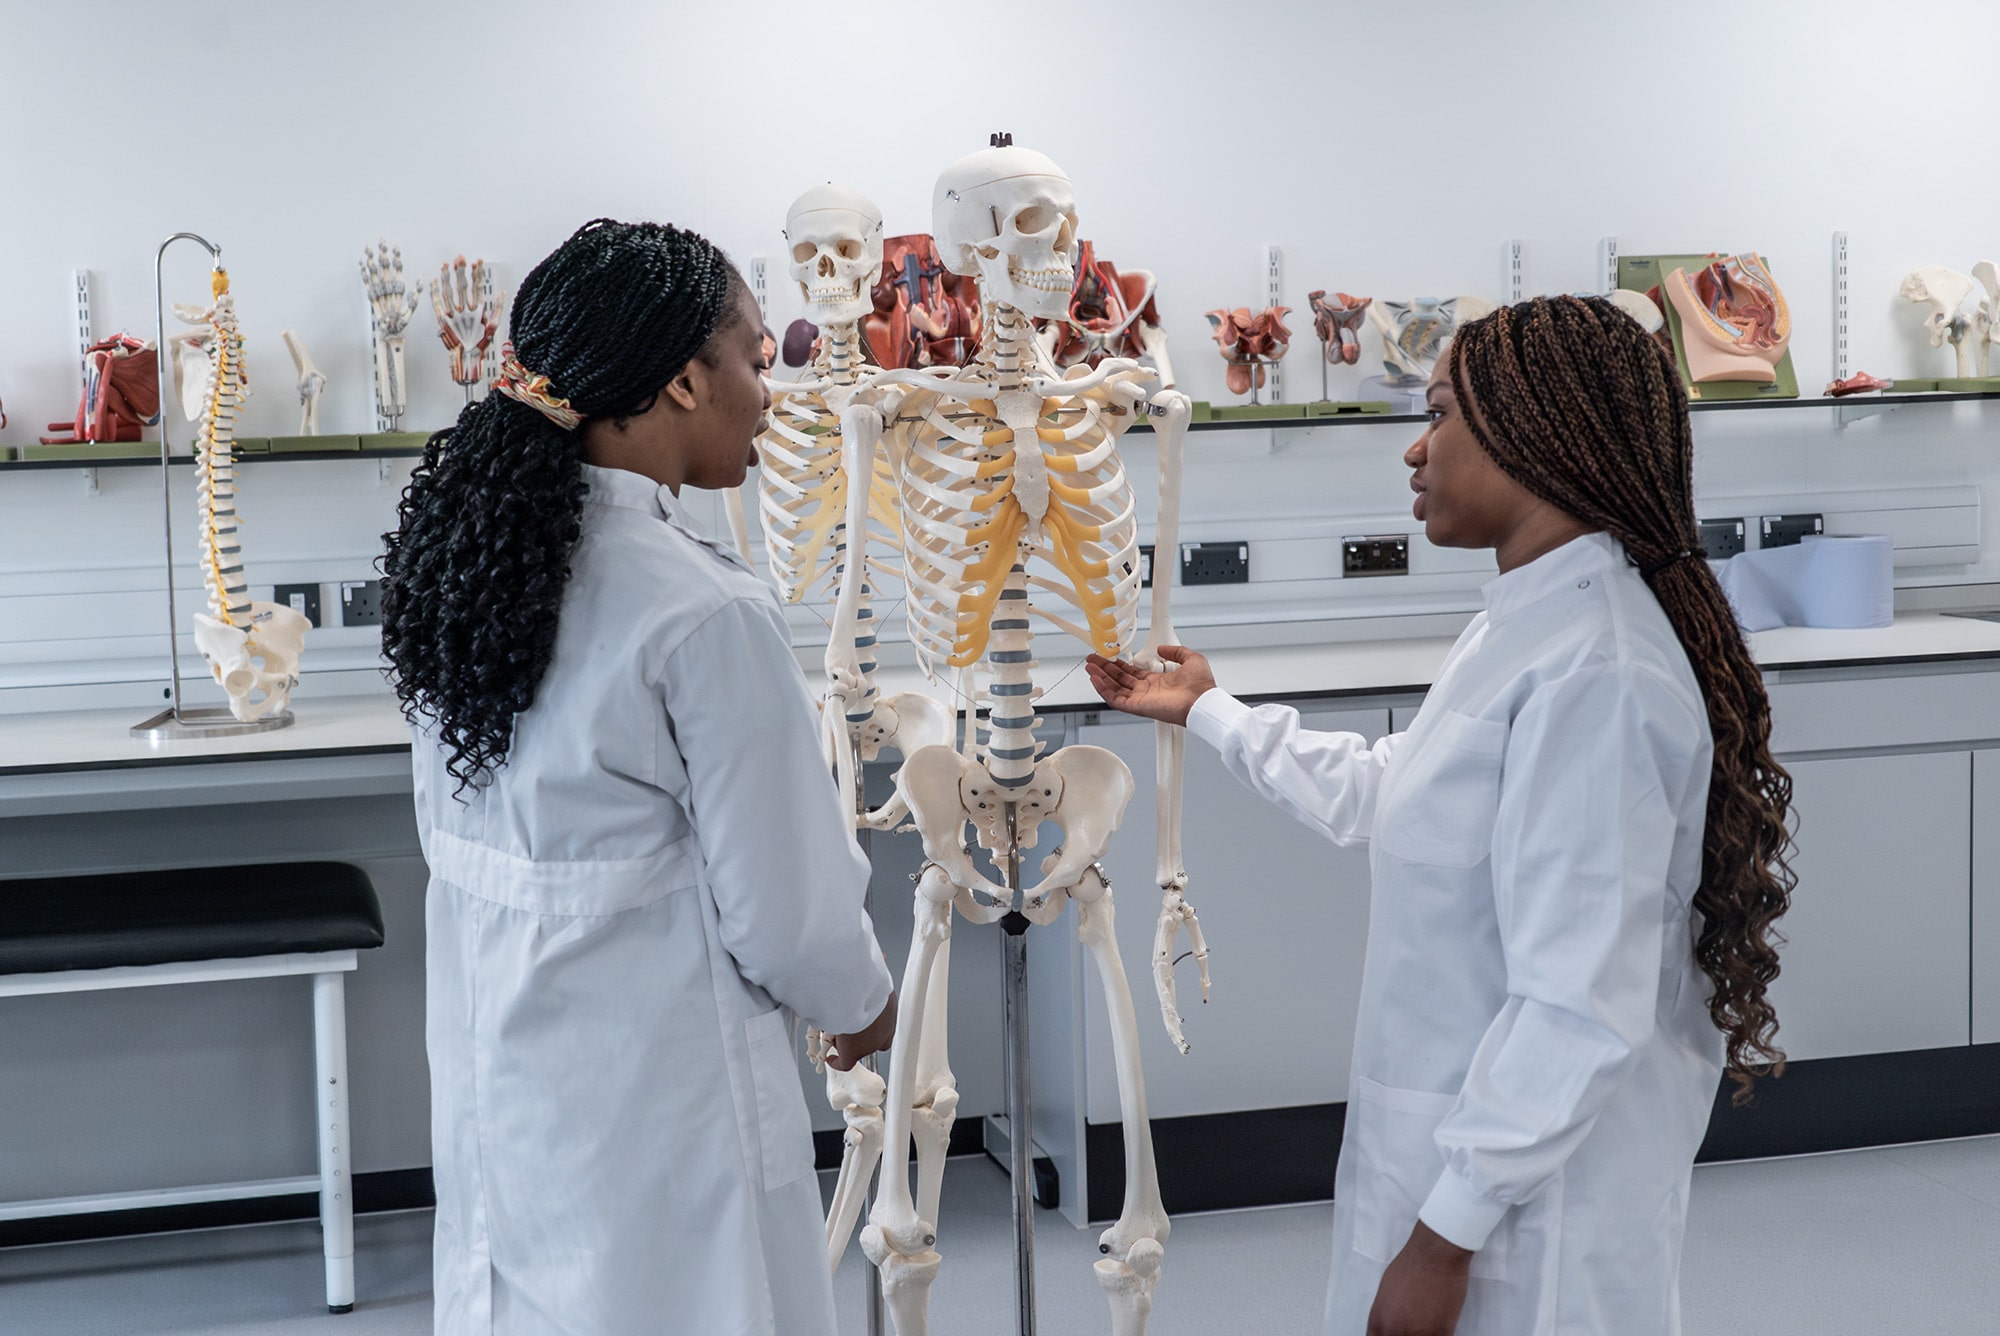 Two students in white lab coats stood observing a full size model of a human skeleton